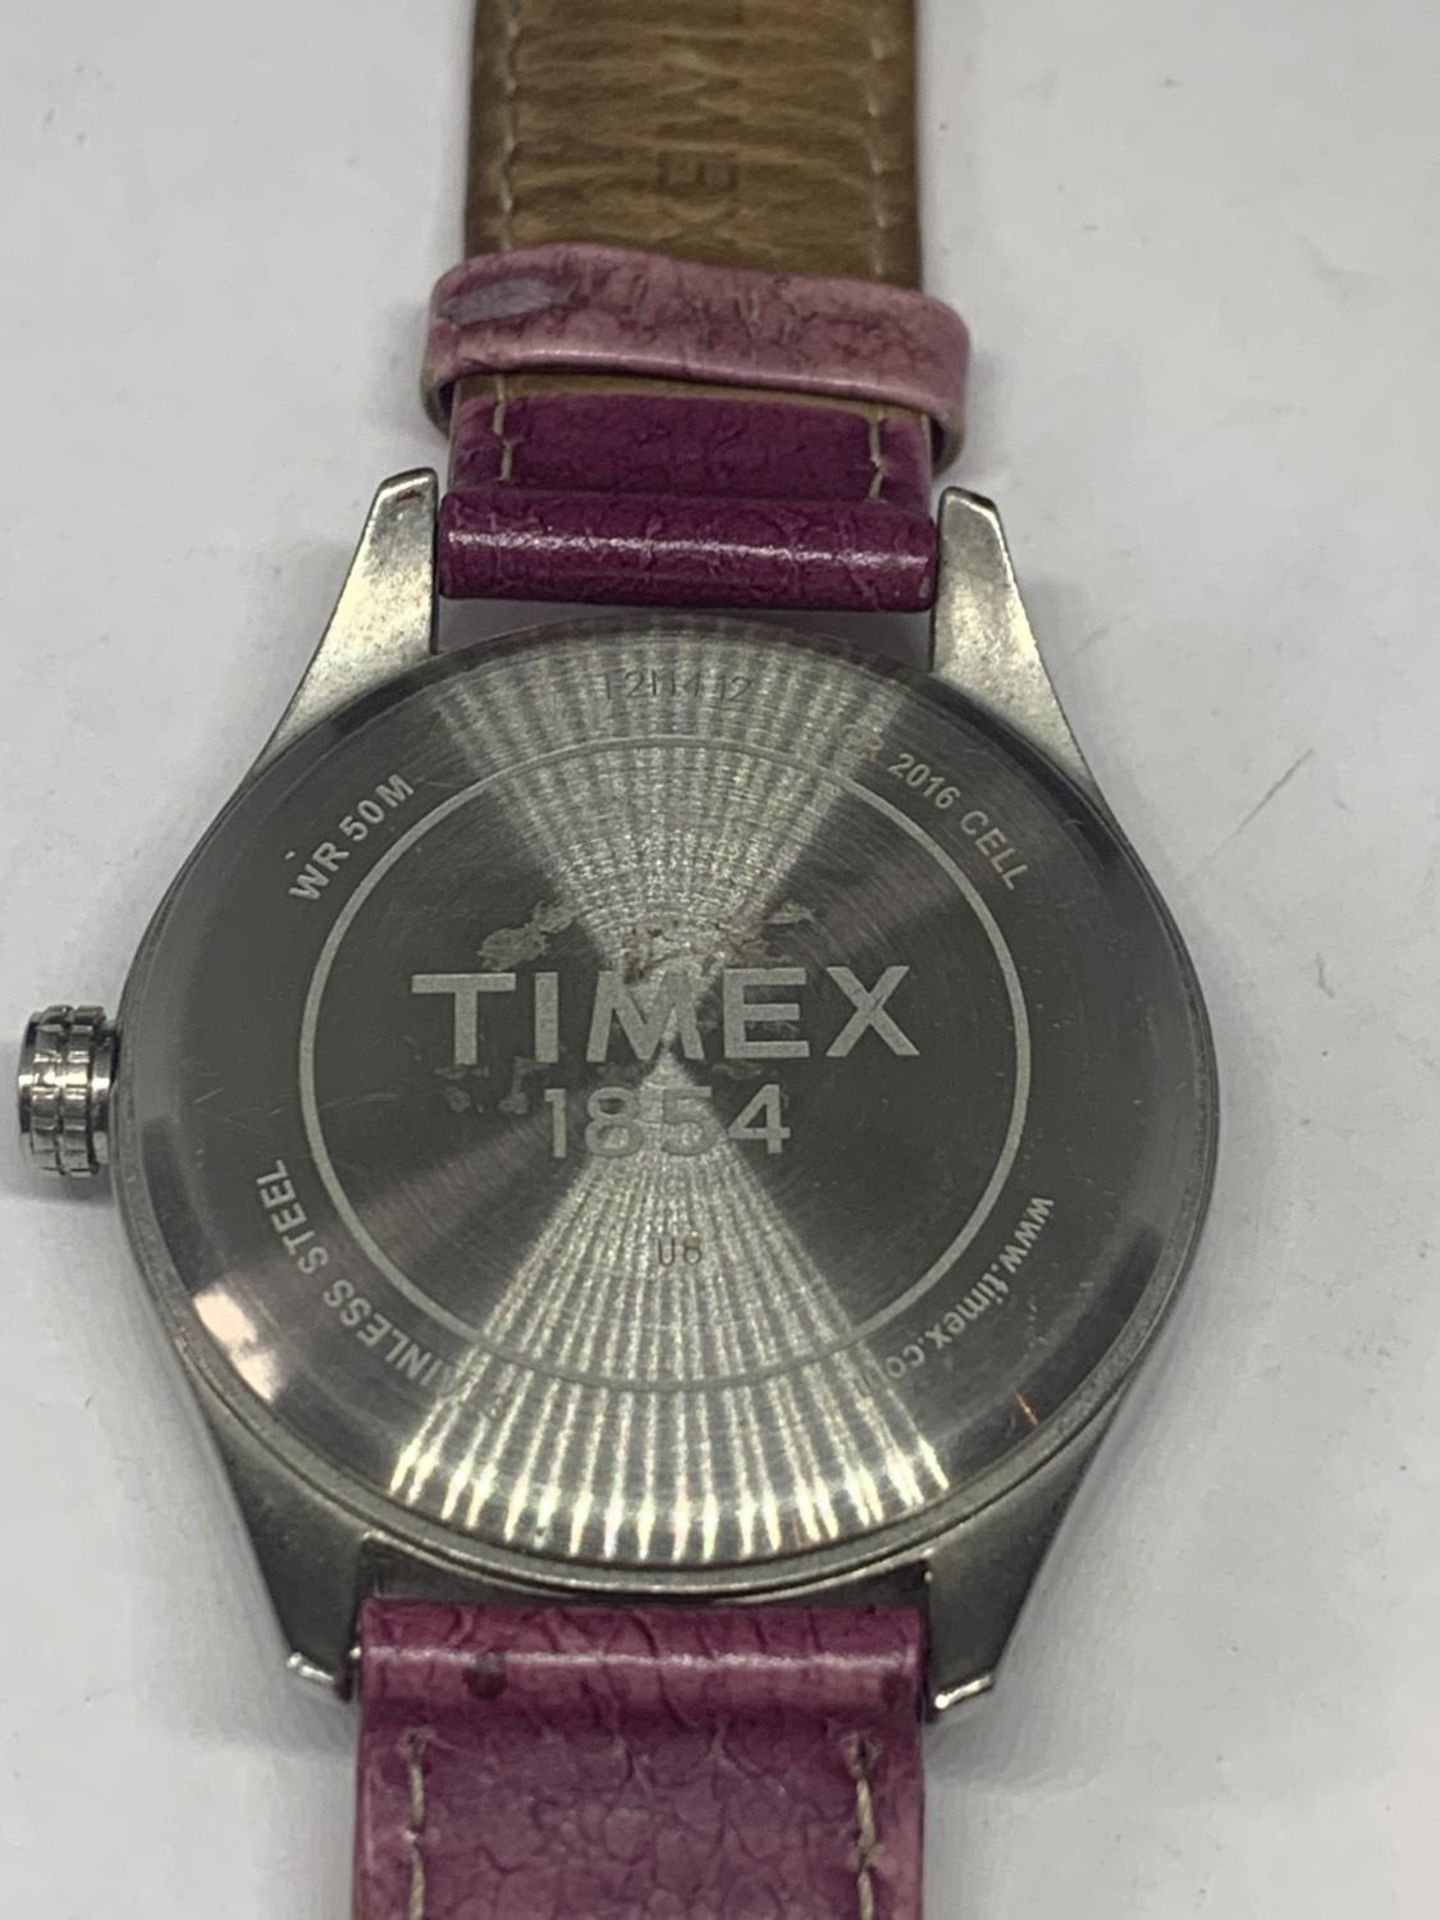 A TIMEX CALENDAR WRISTWATCH IN WORKING ORDER - Image 3 of 3